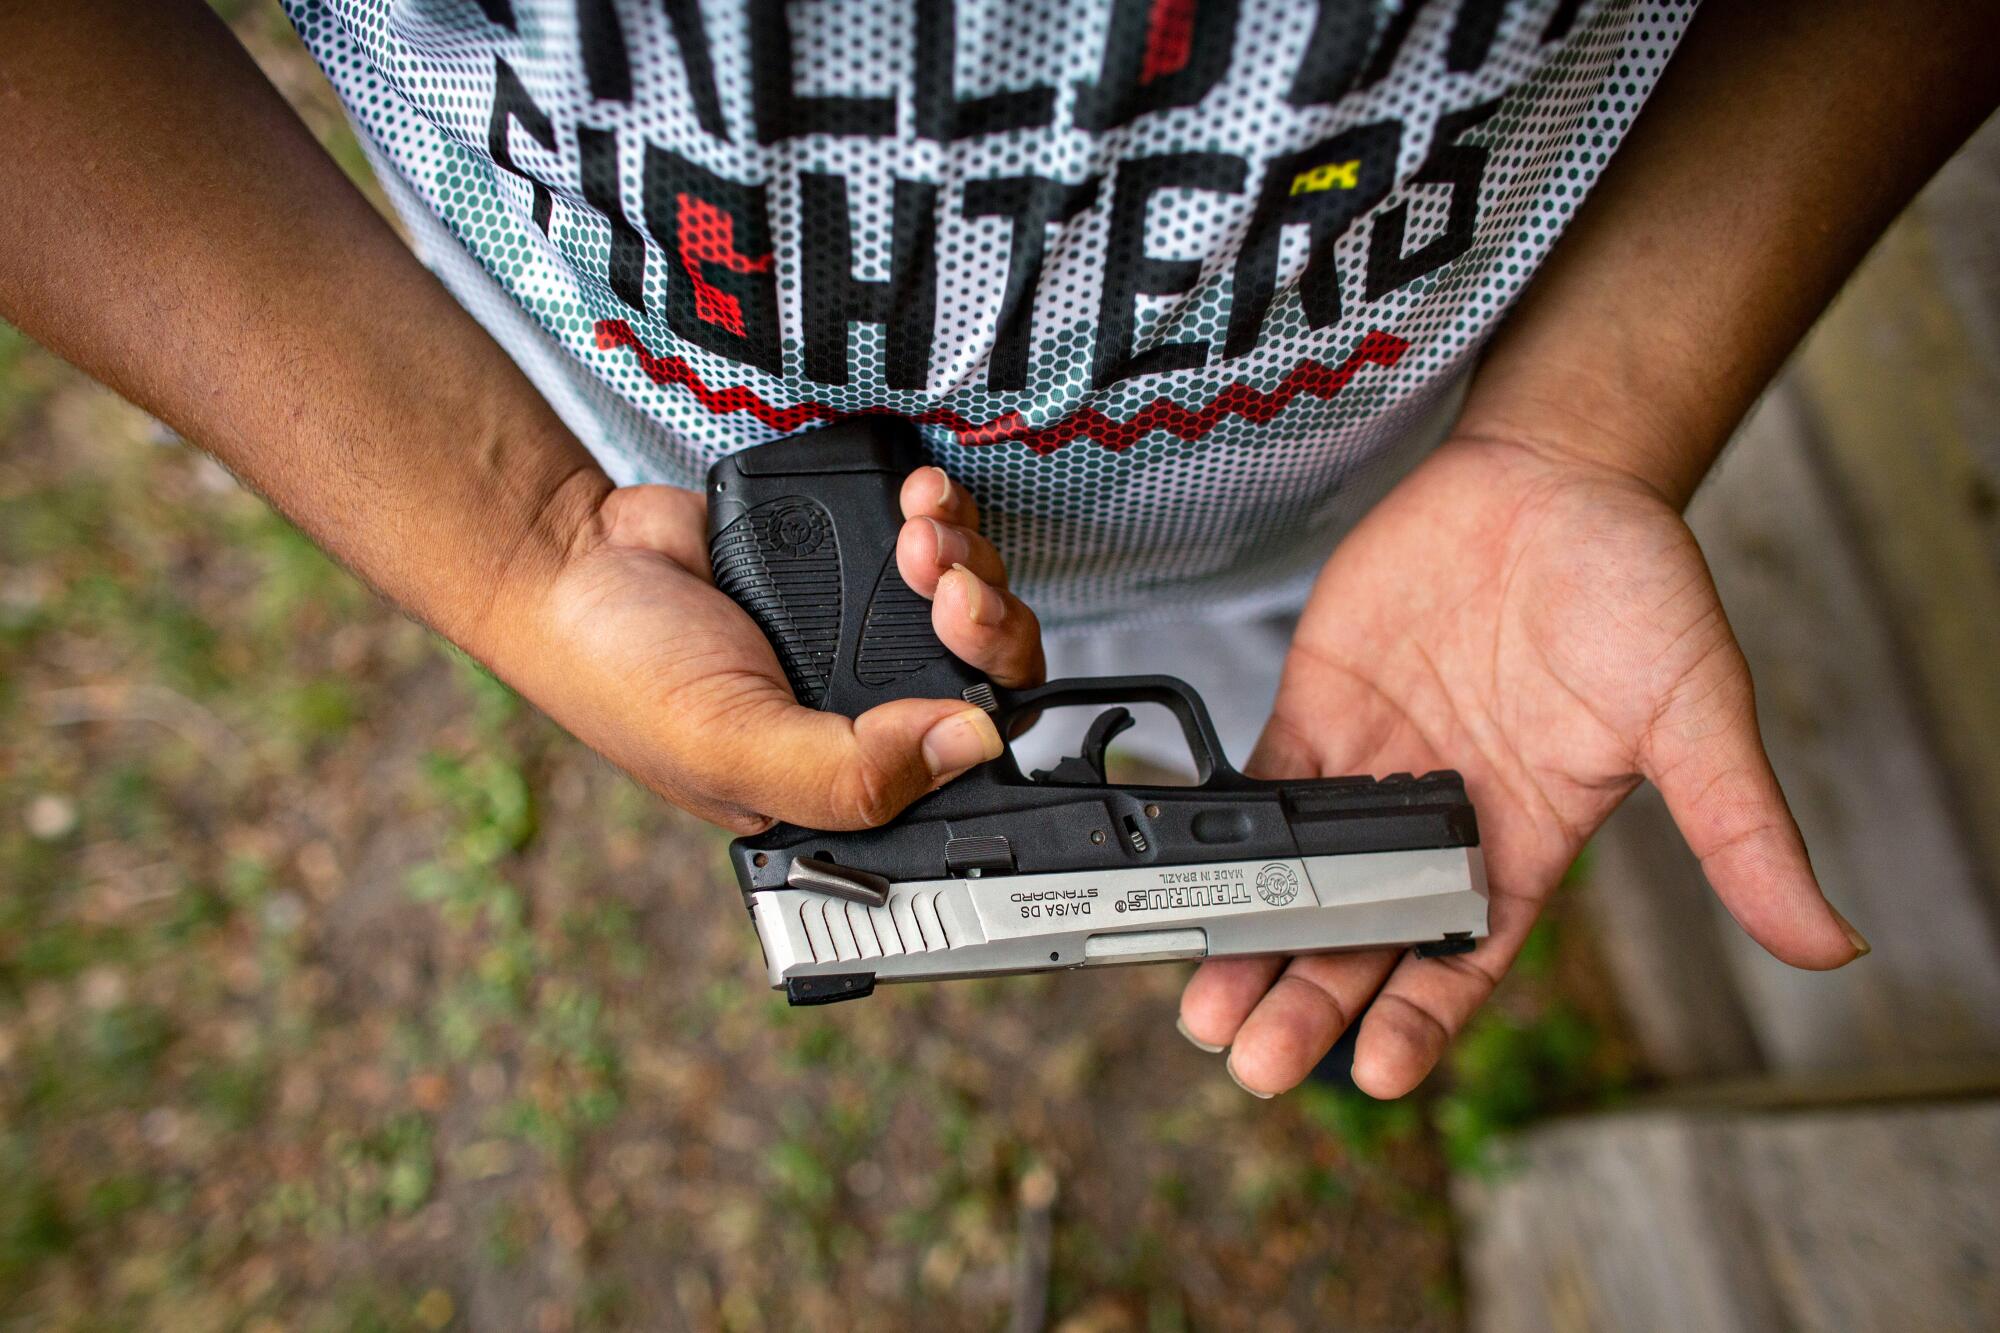 Romeal Taylor, a member of the Minnesota Freedom Fighters, carries a legally registered handgun.